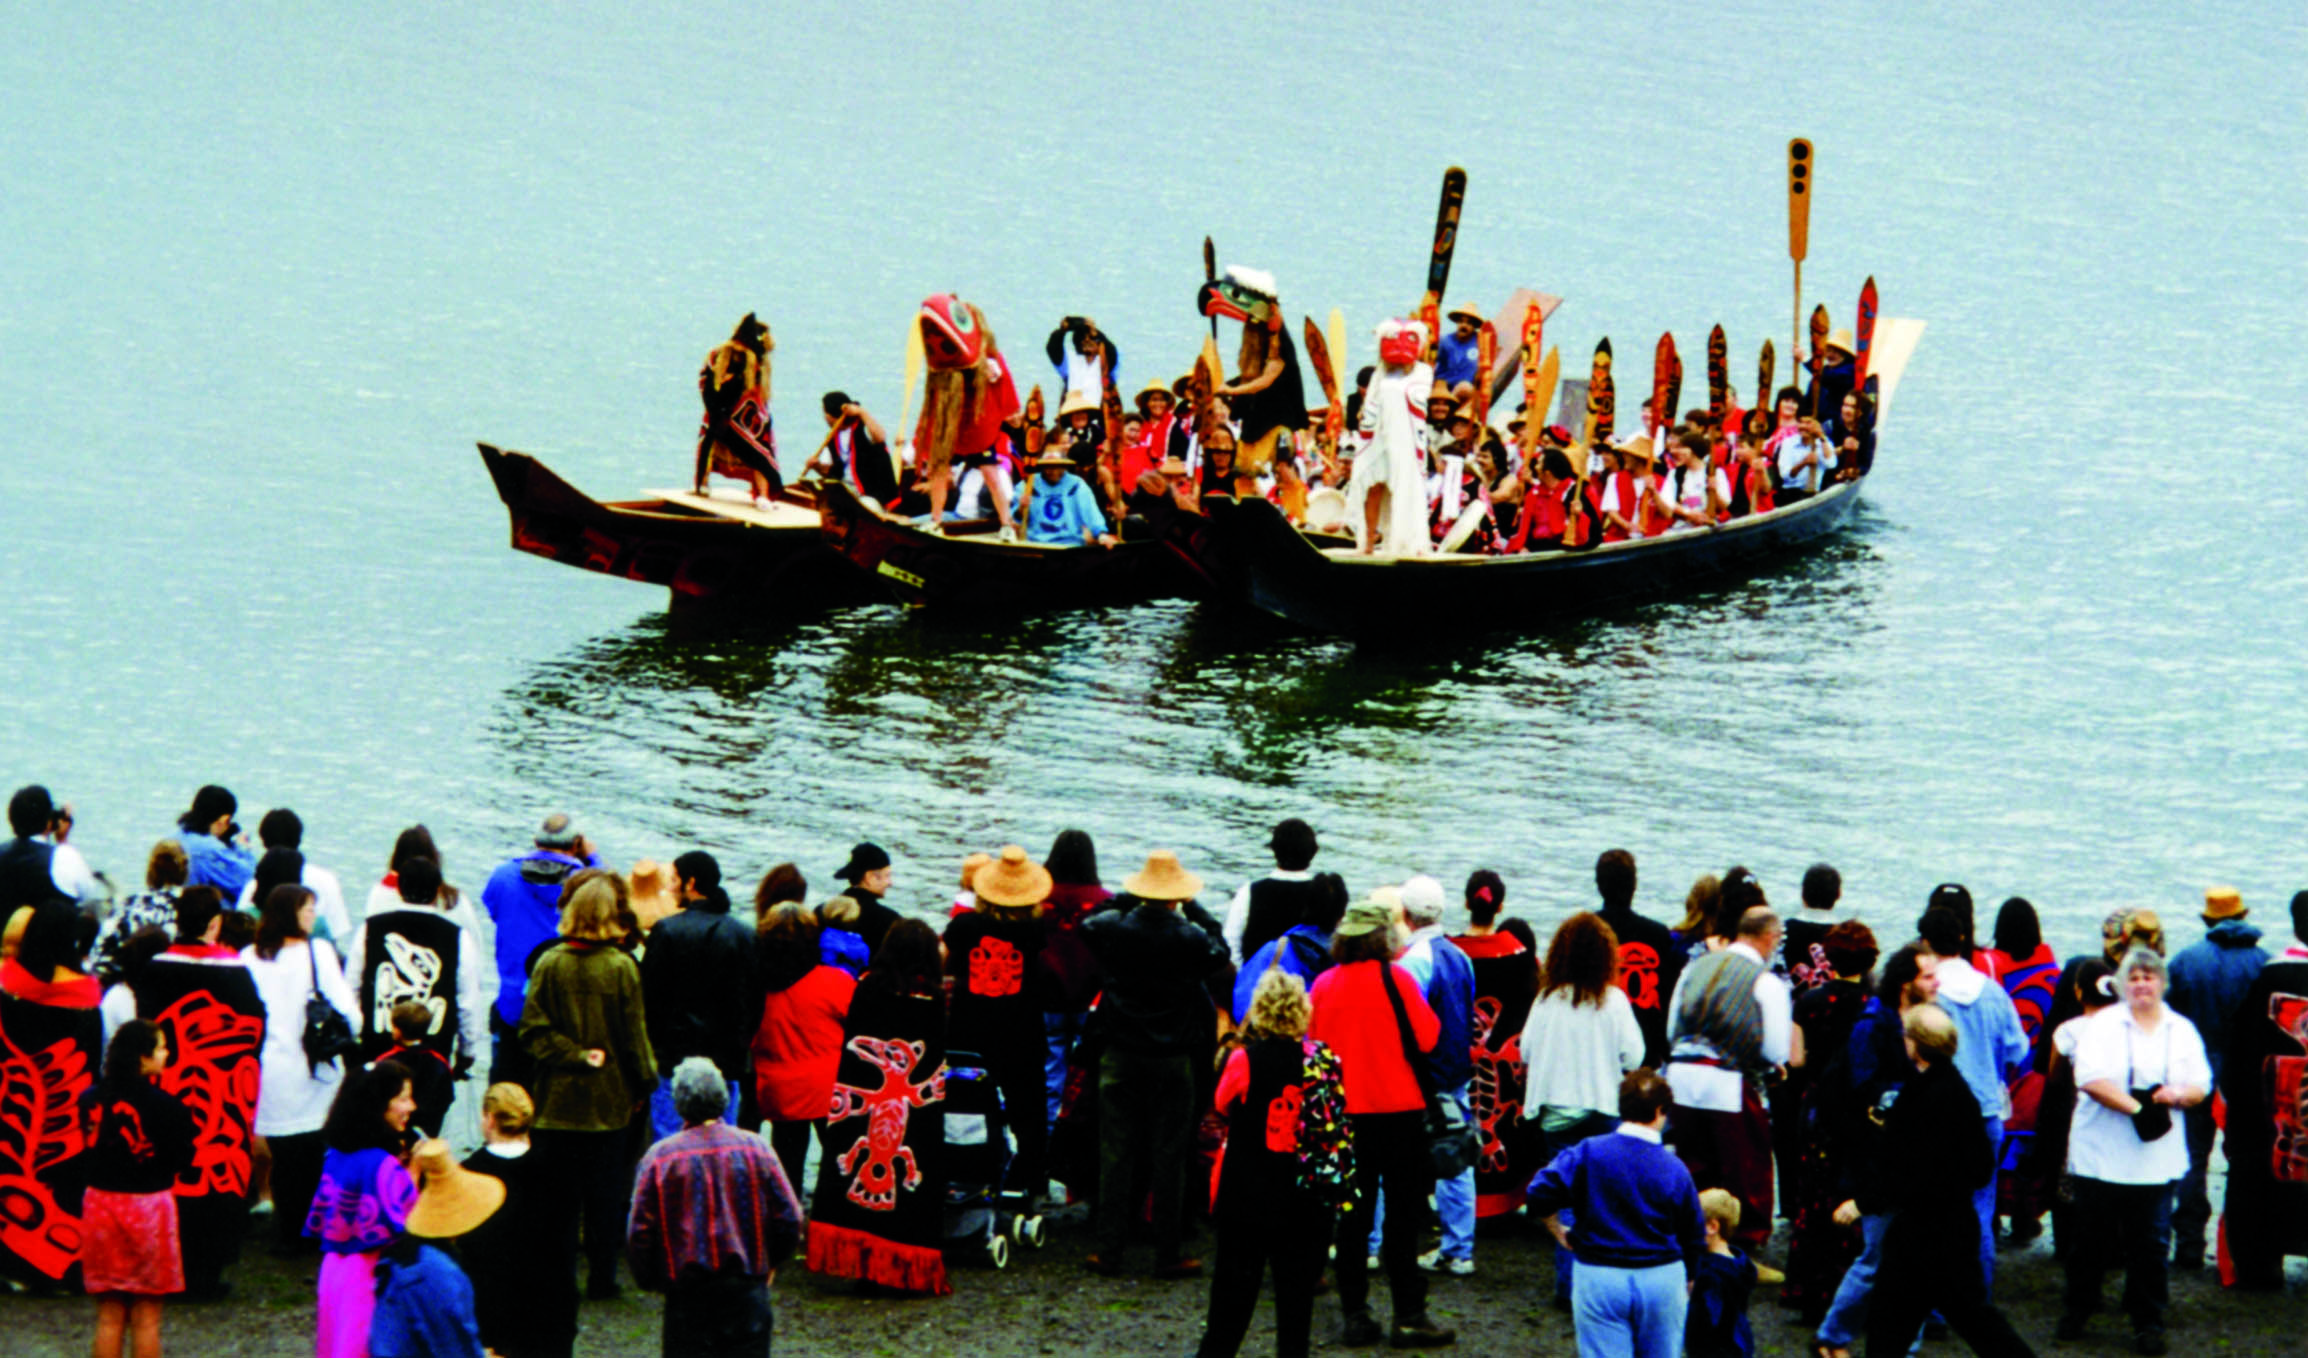 Two canoes filled with paddlers arrive at shore to a throng of people watching. Paddles are pointing up and dancers in regalia and masks stand on platforms built on the canoes' prow.